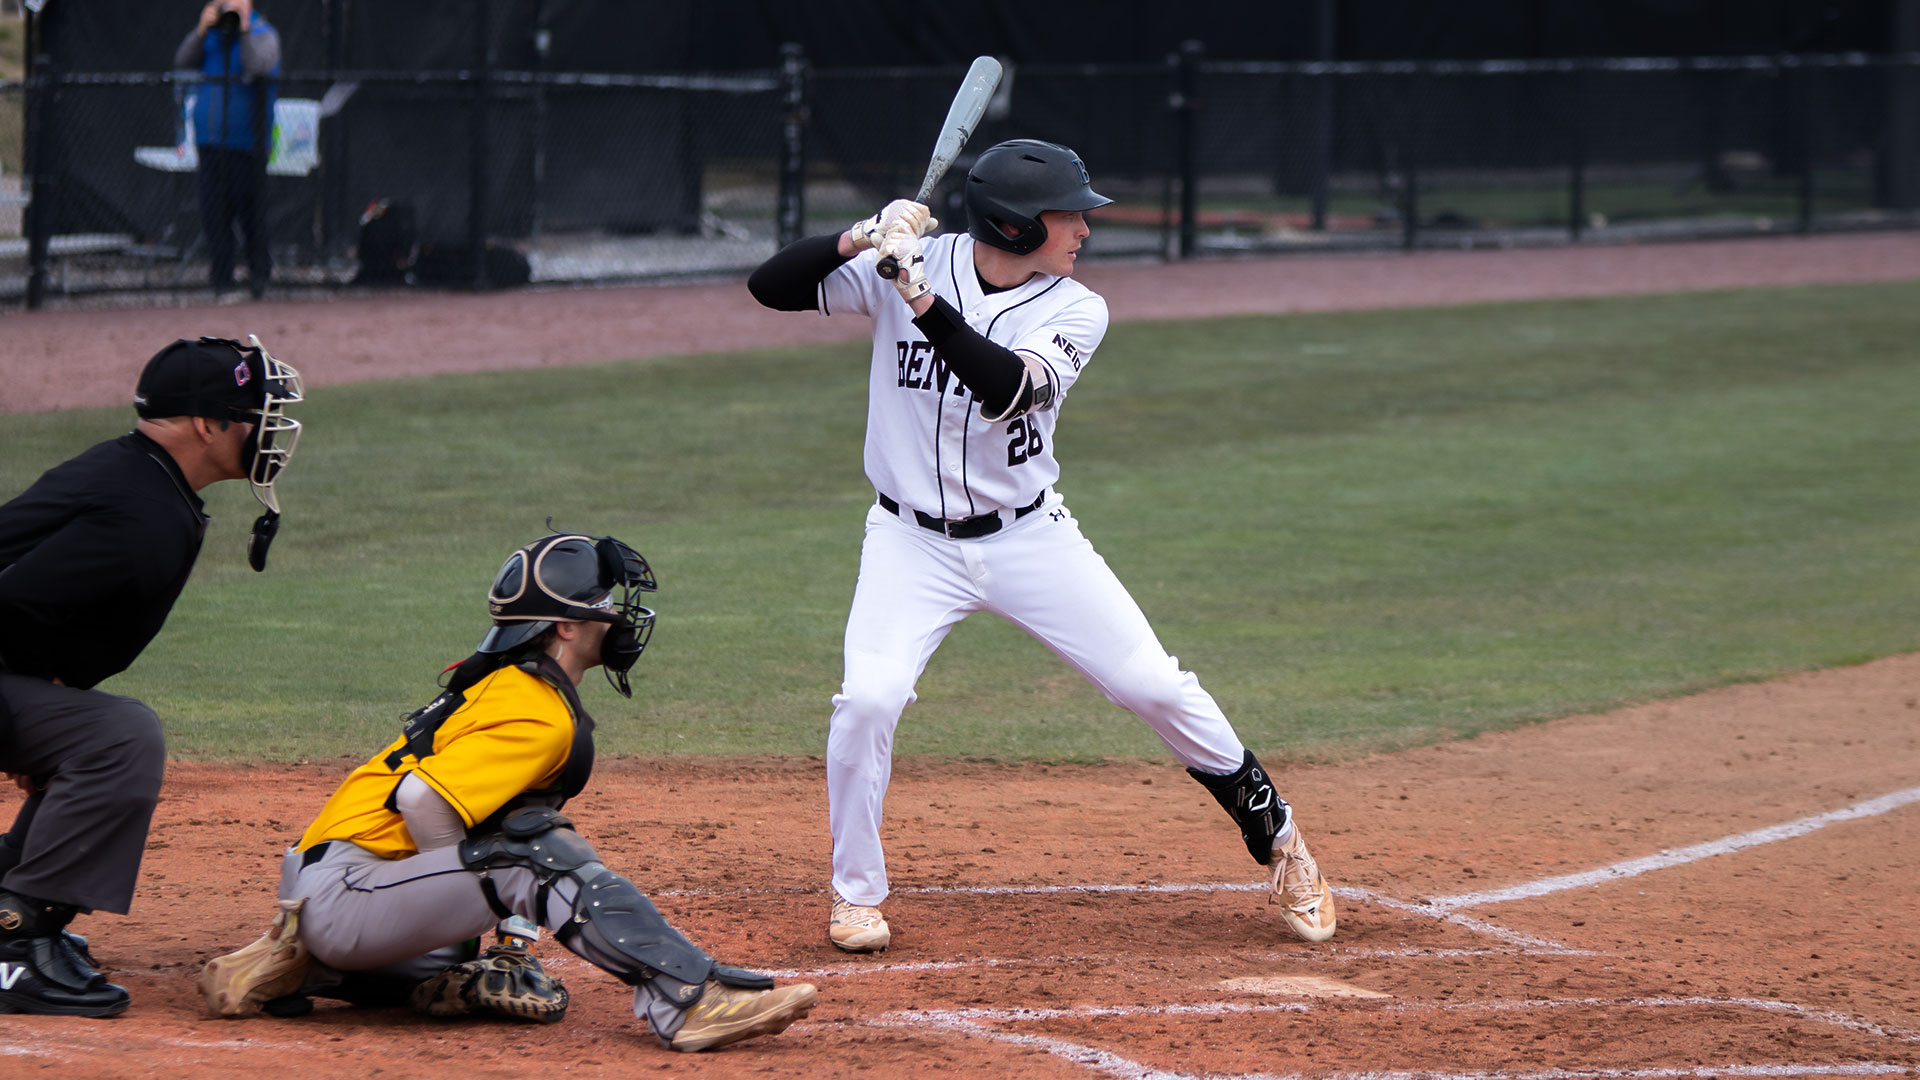 Gonzalez collects three hits, but eight-run rally by AIC dooms Bentley